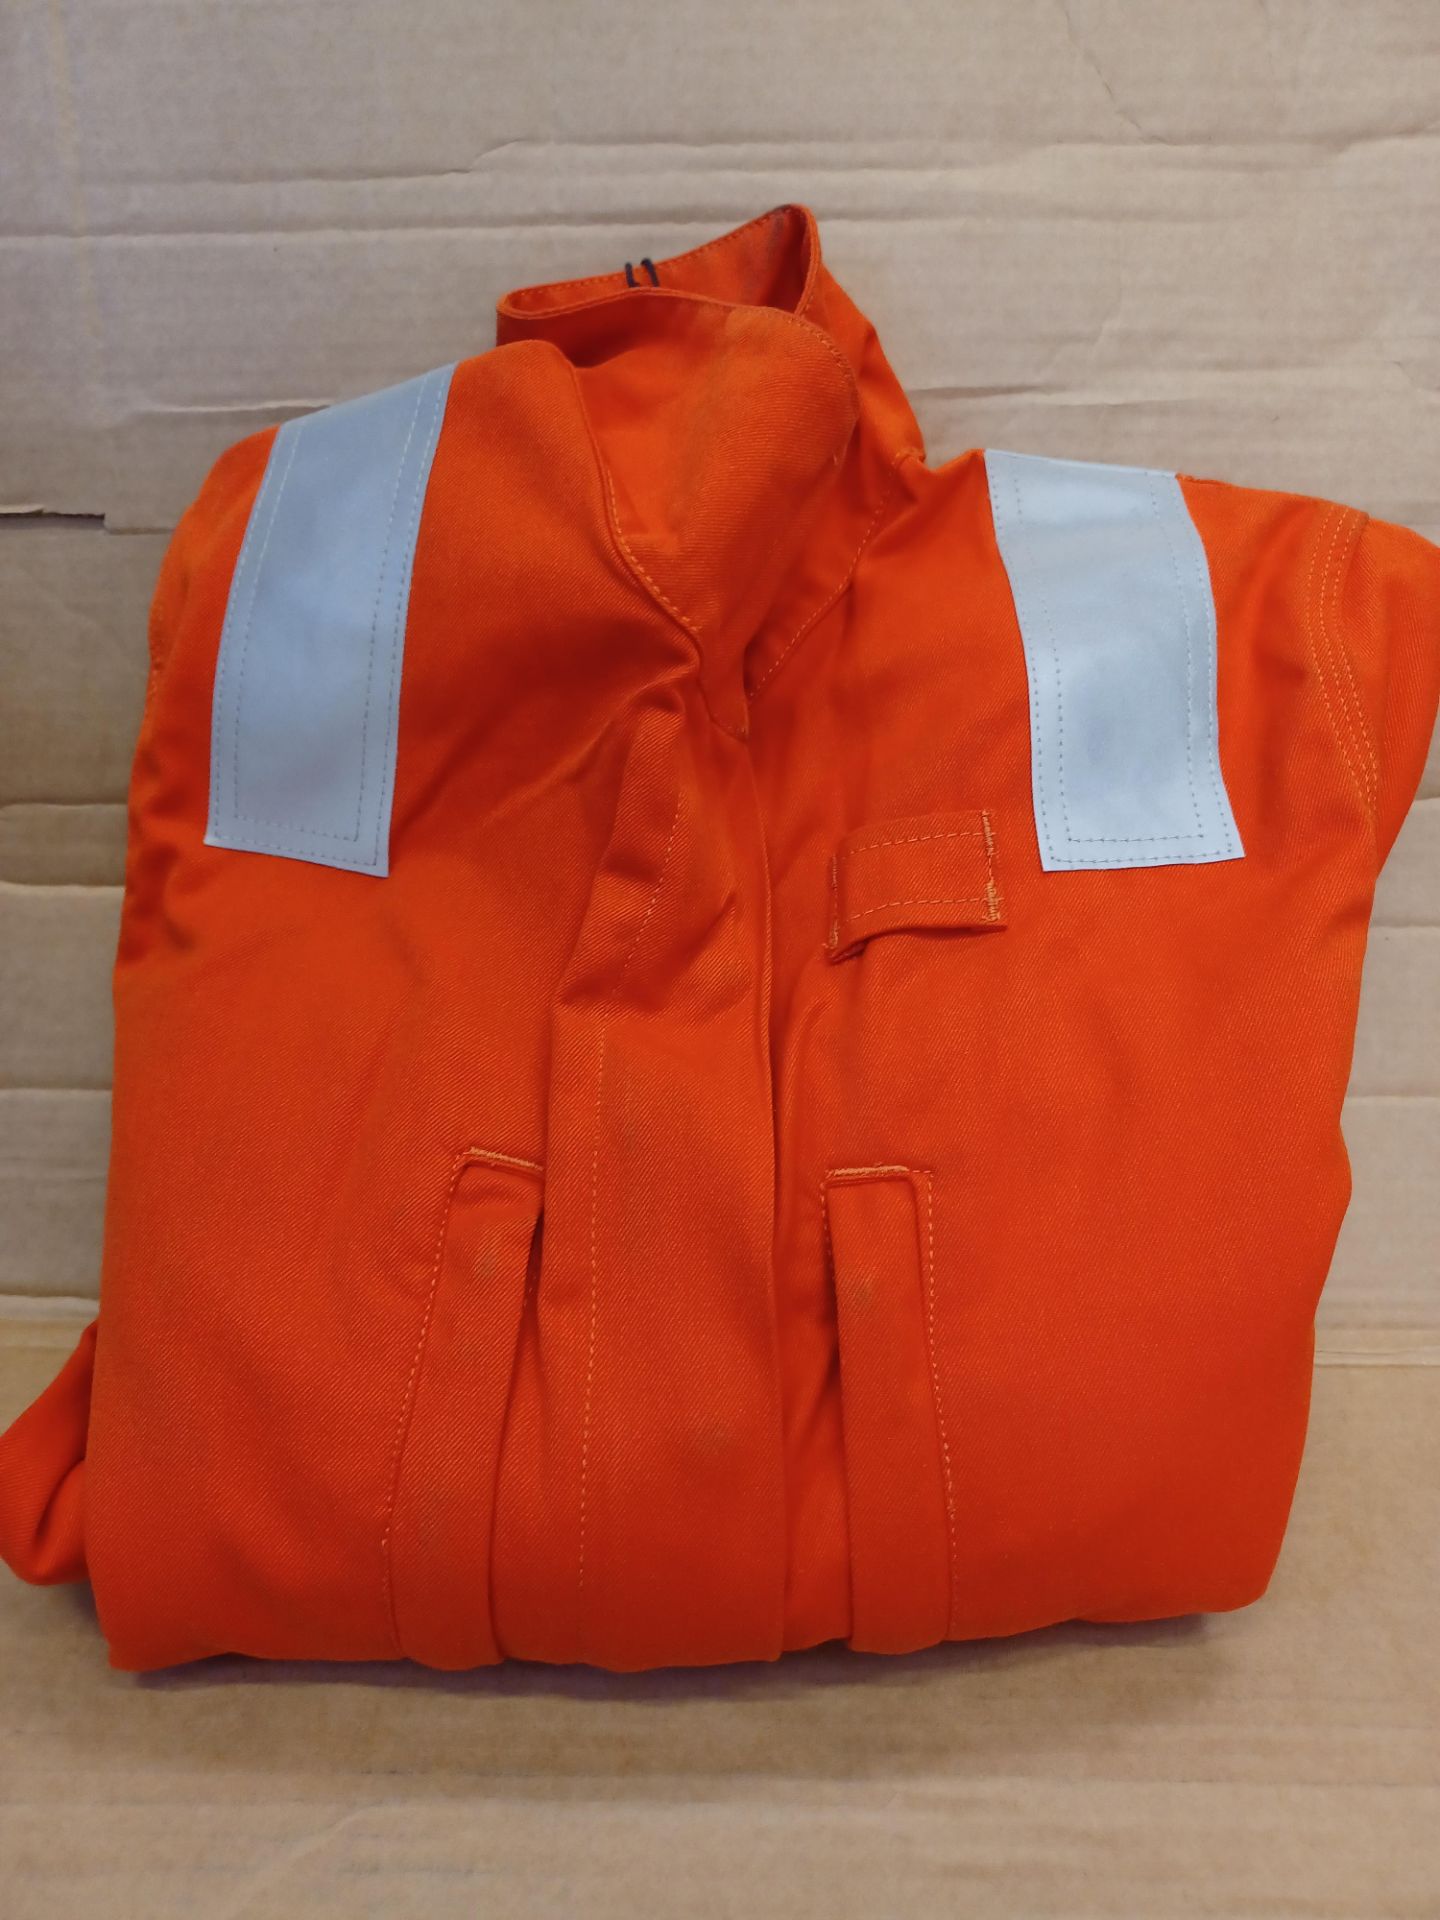 NEW PACKAGED PROGARM 6101 ARC COVERALLS. RRP £202. S1-28